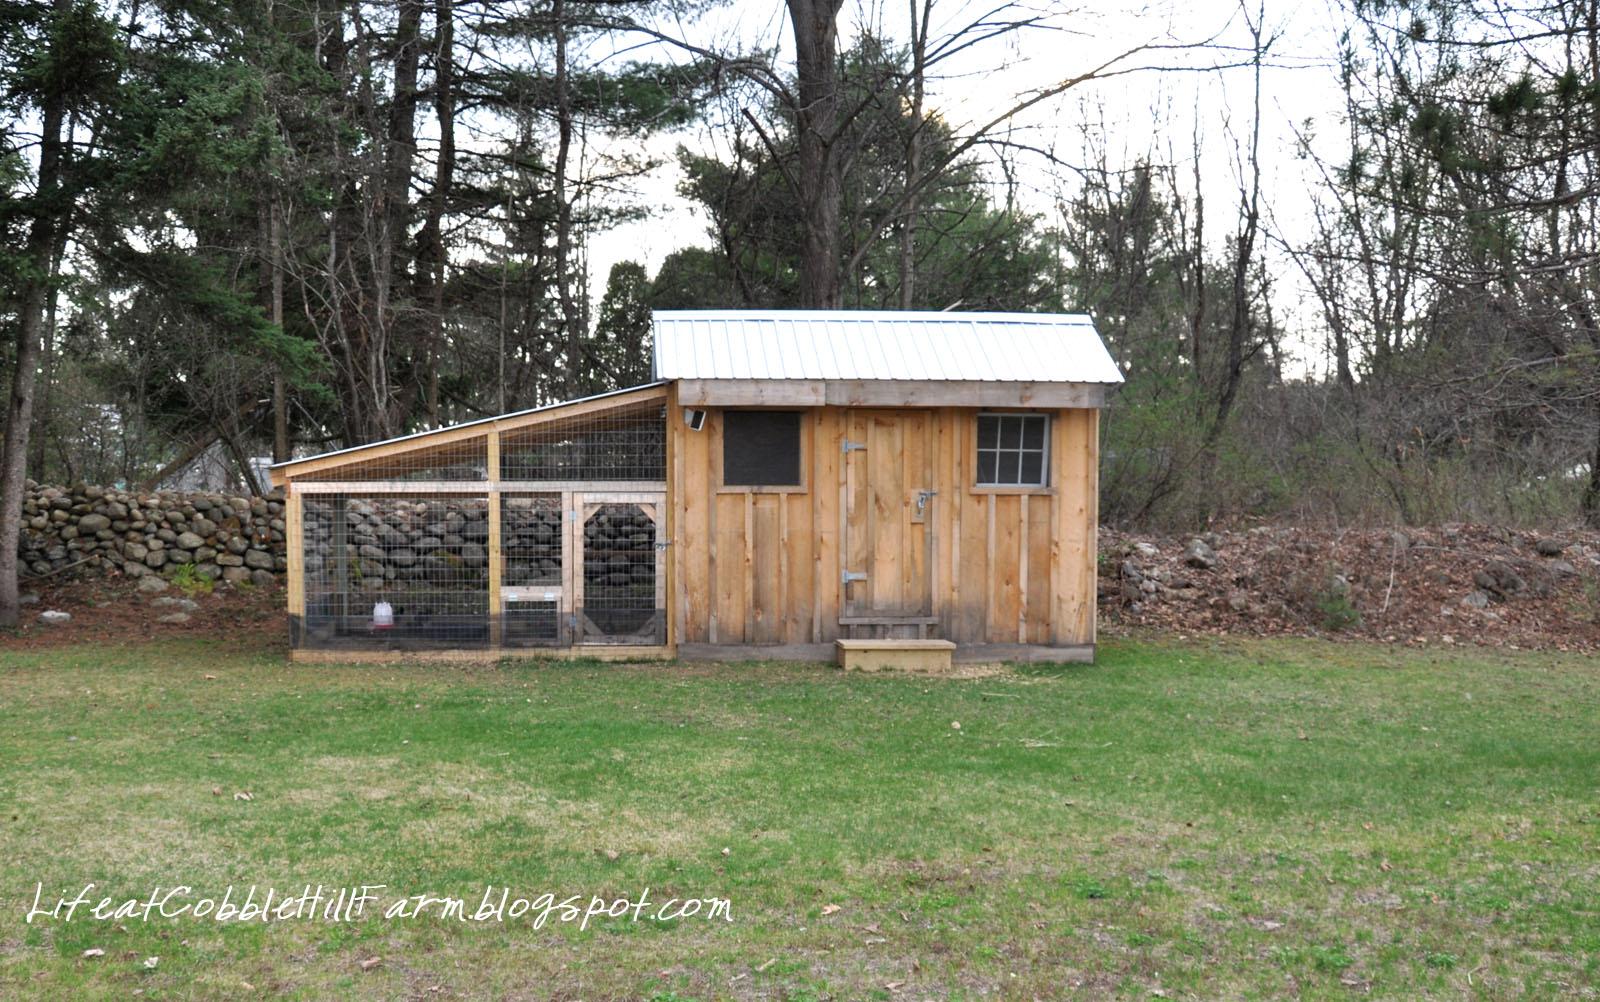 Chicken Coop 101: Thirteen Lessons Learned